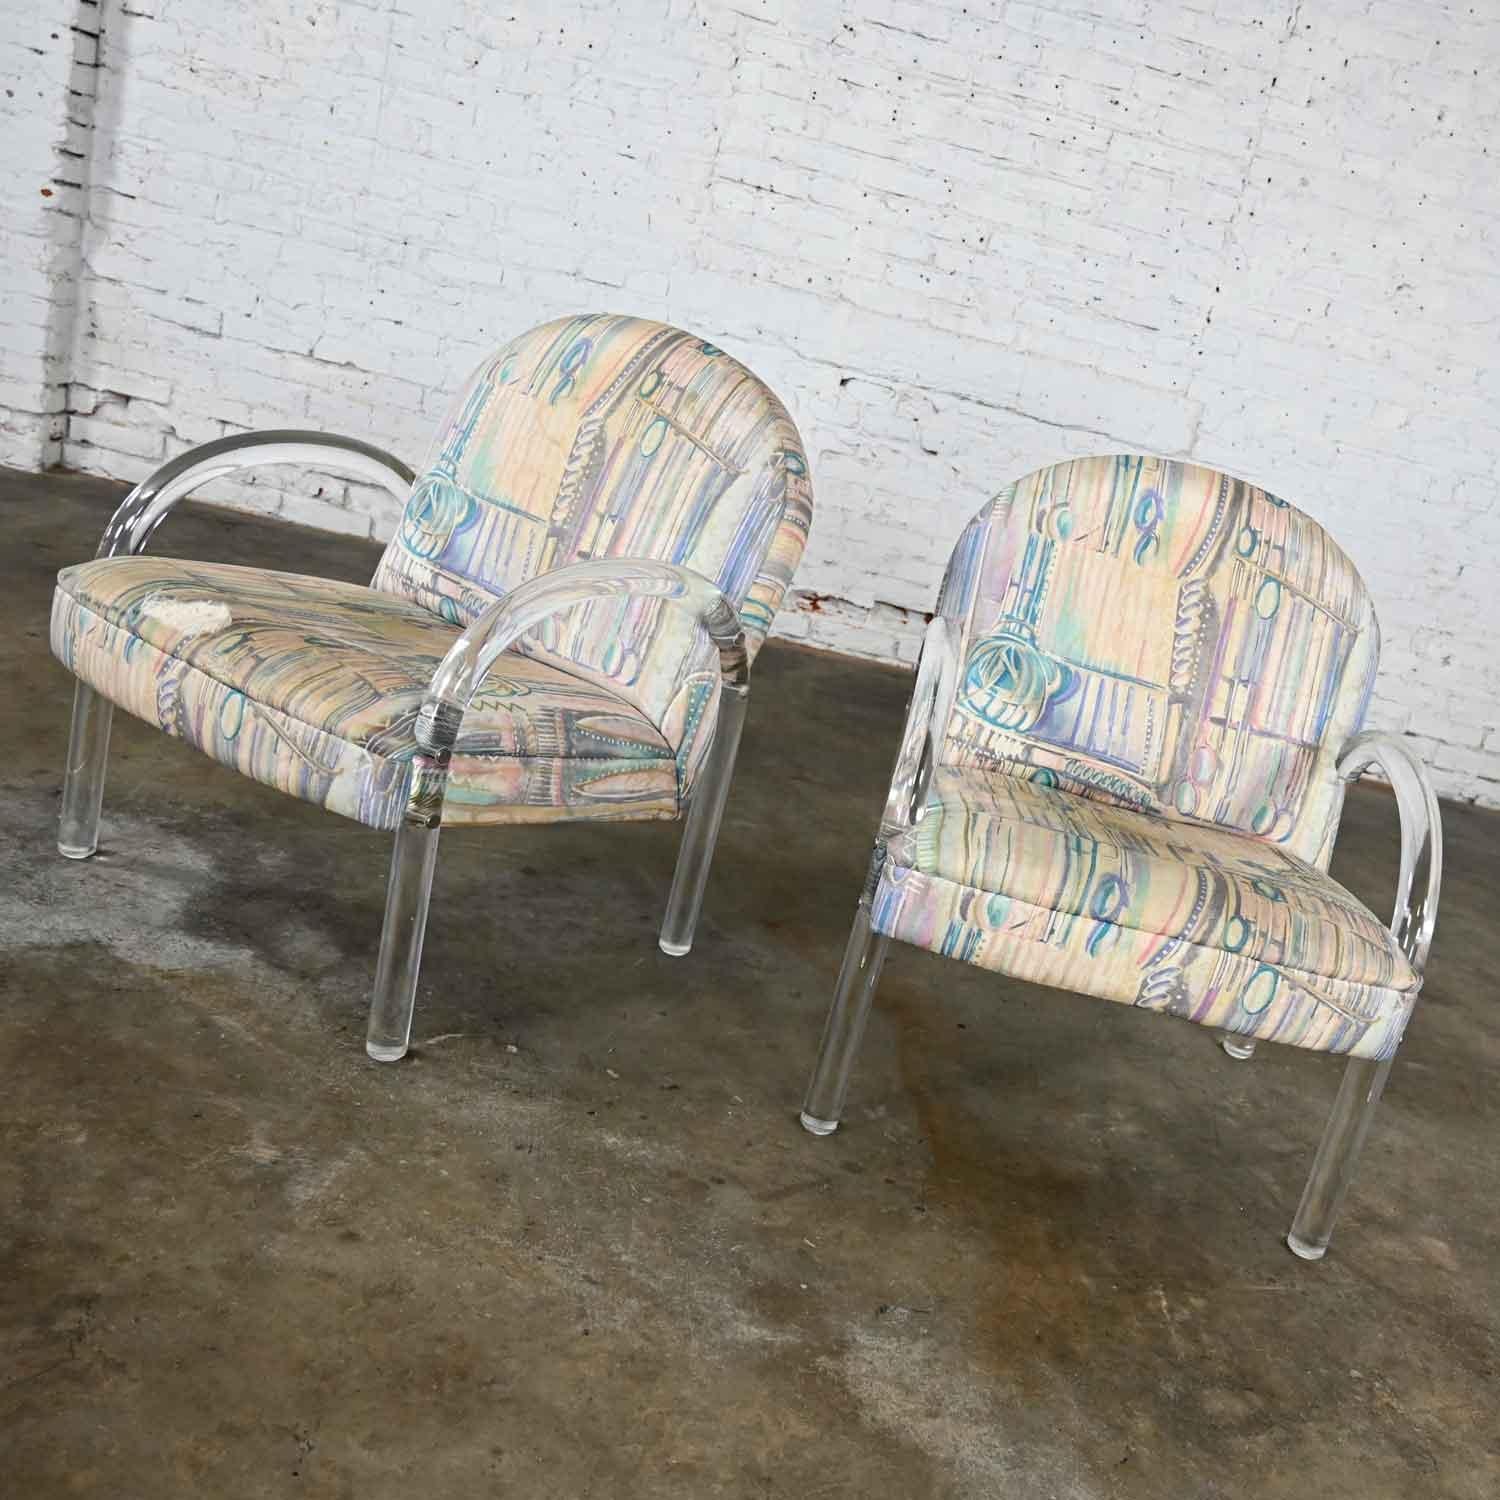 Lovely pair of modern Lucite Waterfall style side chairs attributed to Leon Rosen for The Pace Collection. Beautiful condition keeping in mind that these are vintage so will show signs of wear and use. They wear their original fabric which is beyond